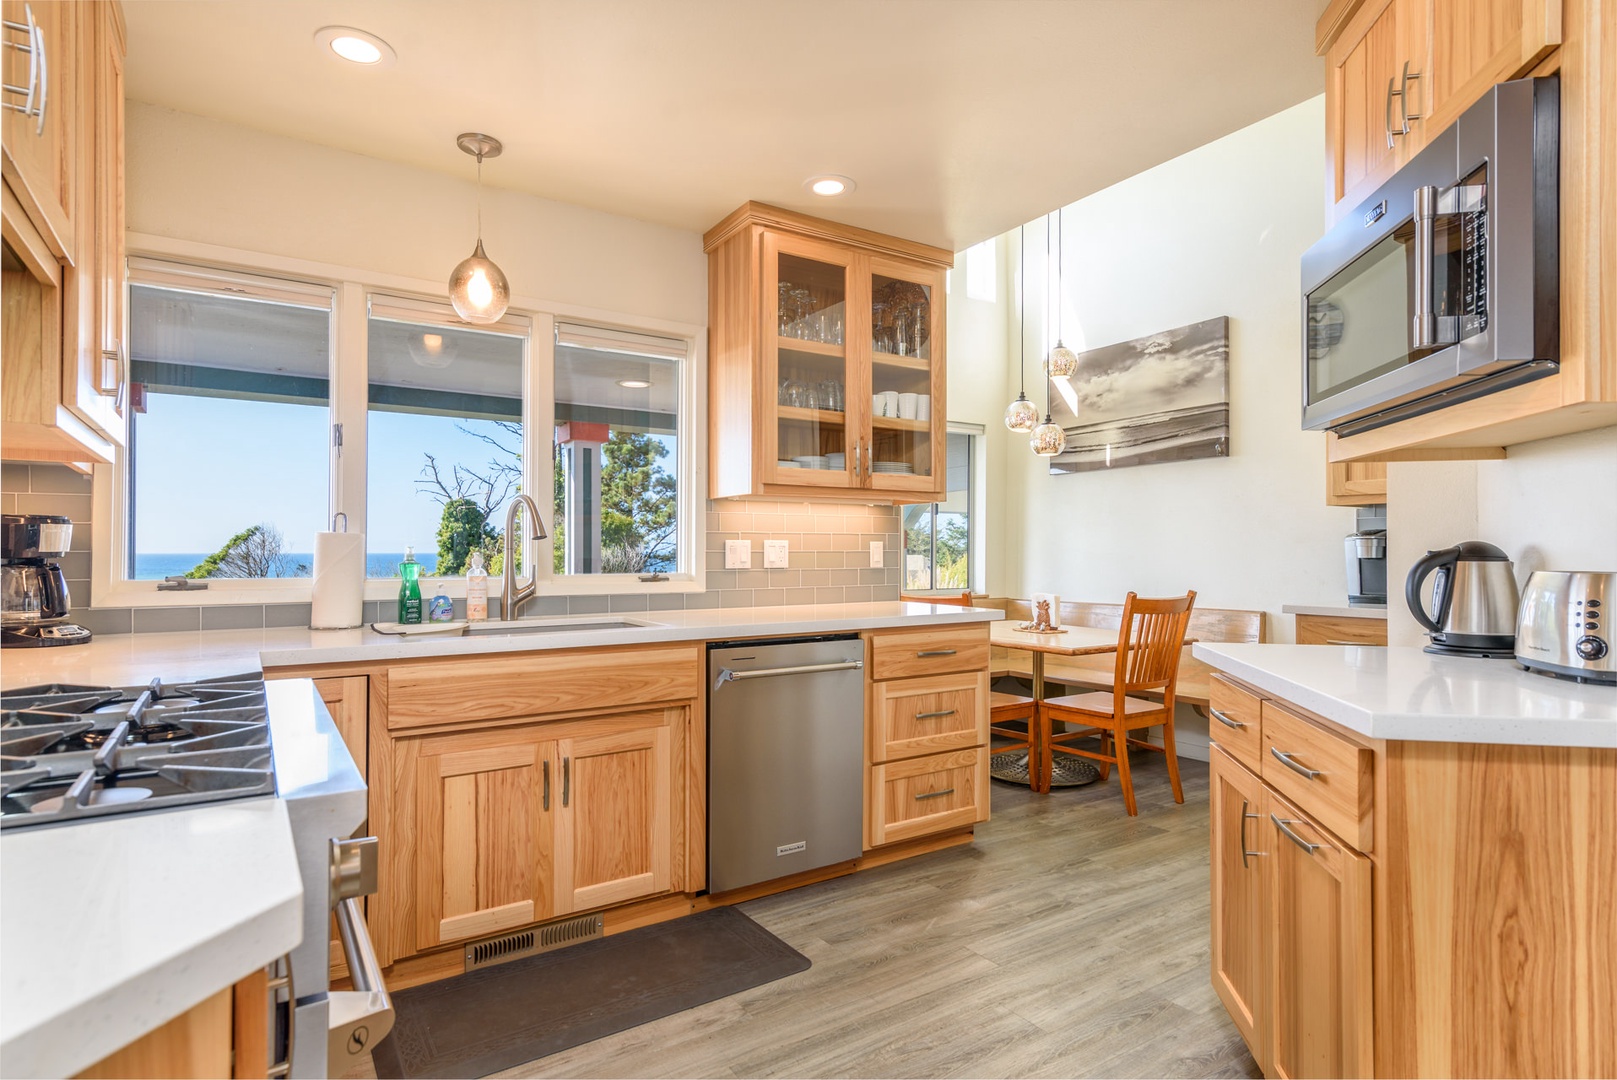 Fully equipped kitchen with stainless-steel appliances